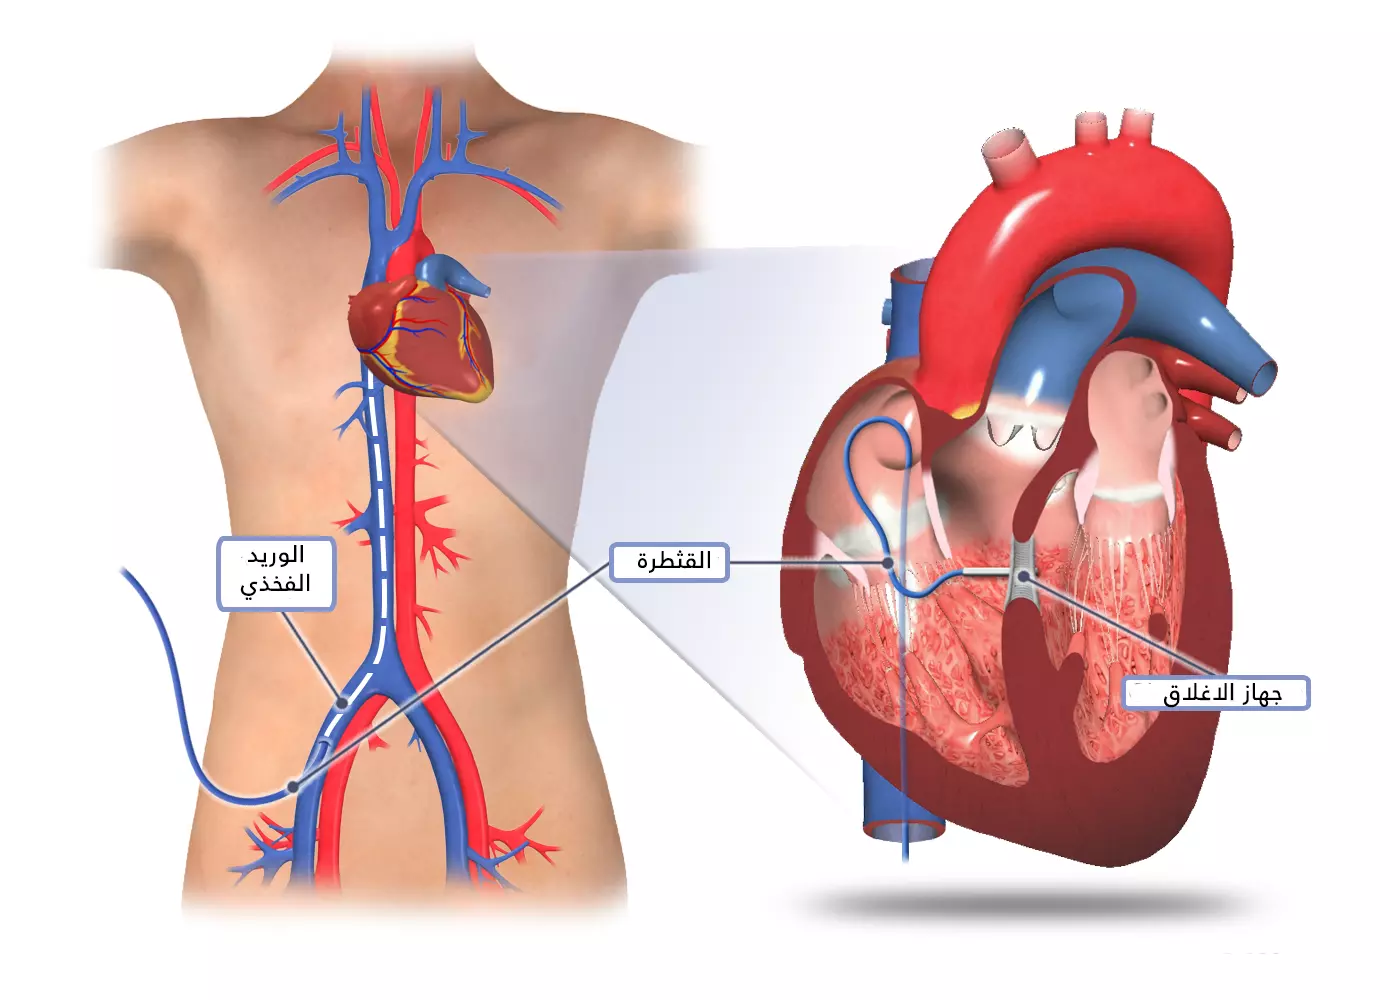 A ventricular septal defect (VSD) is repaired via catheter by inserting a closure device into the hole formed between the ventricles.